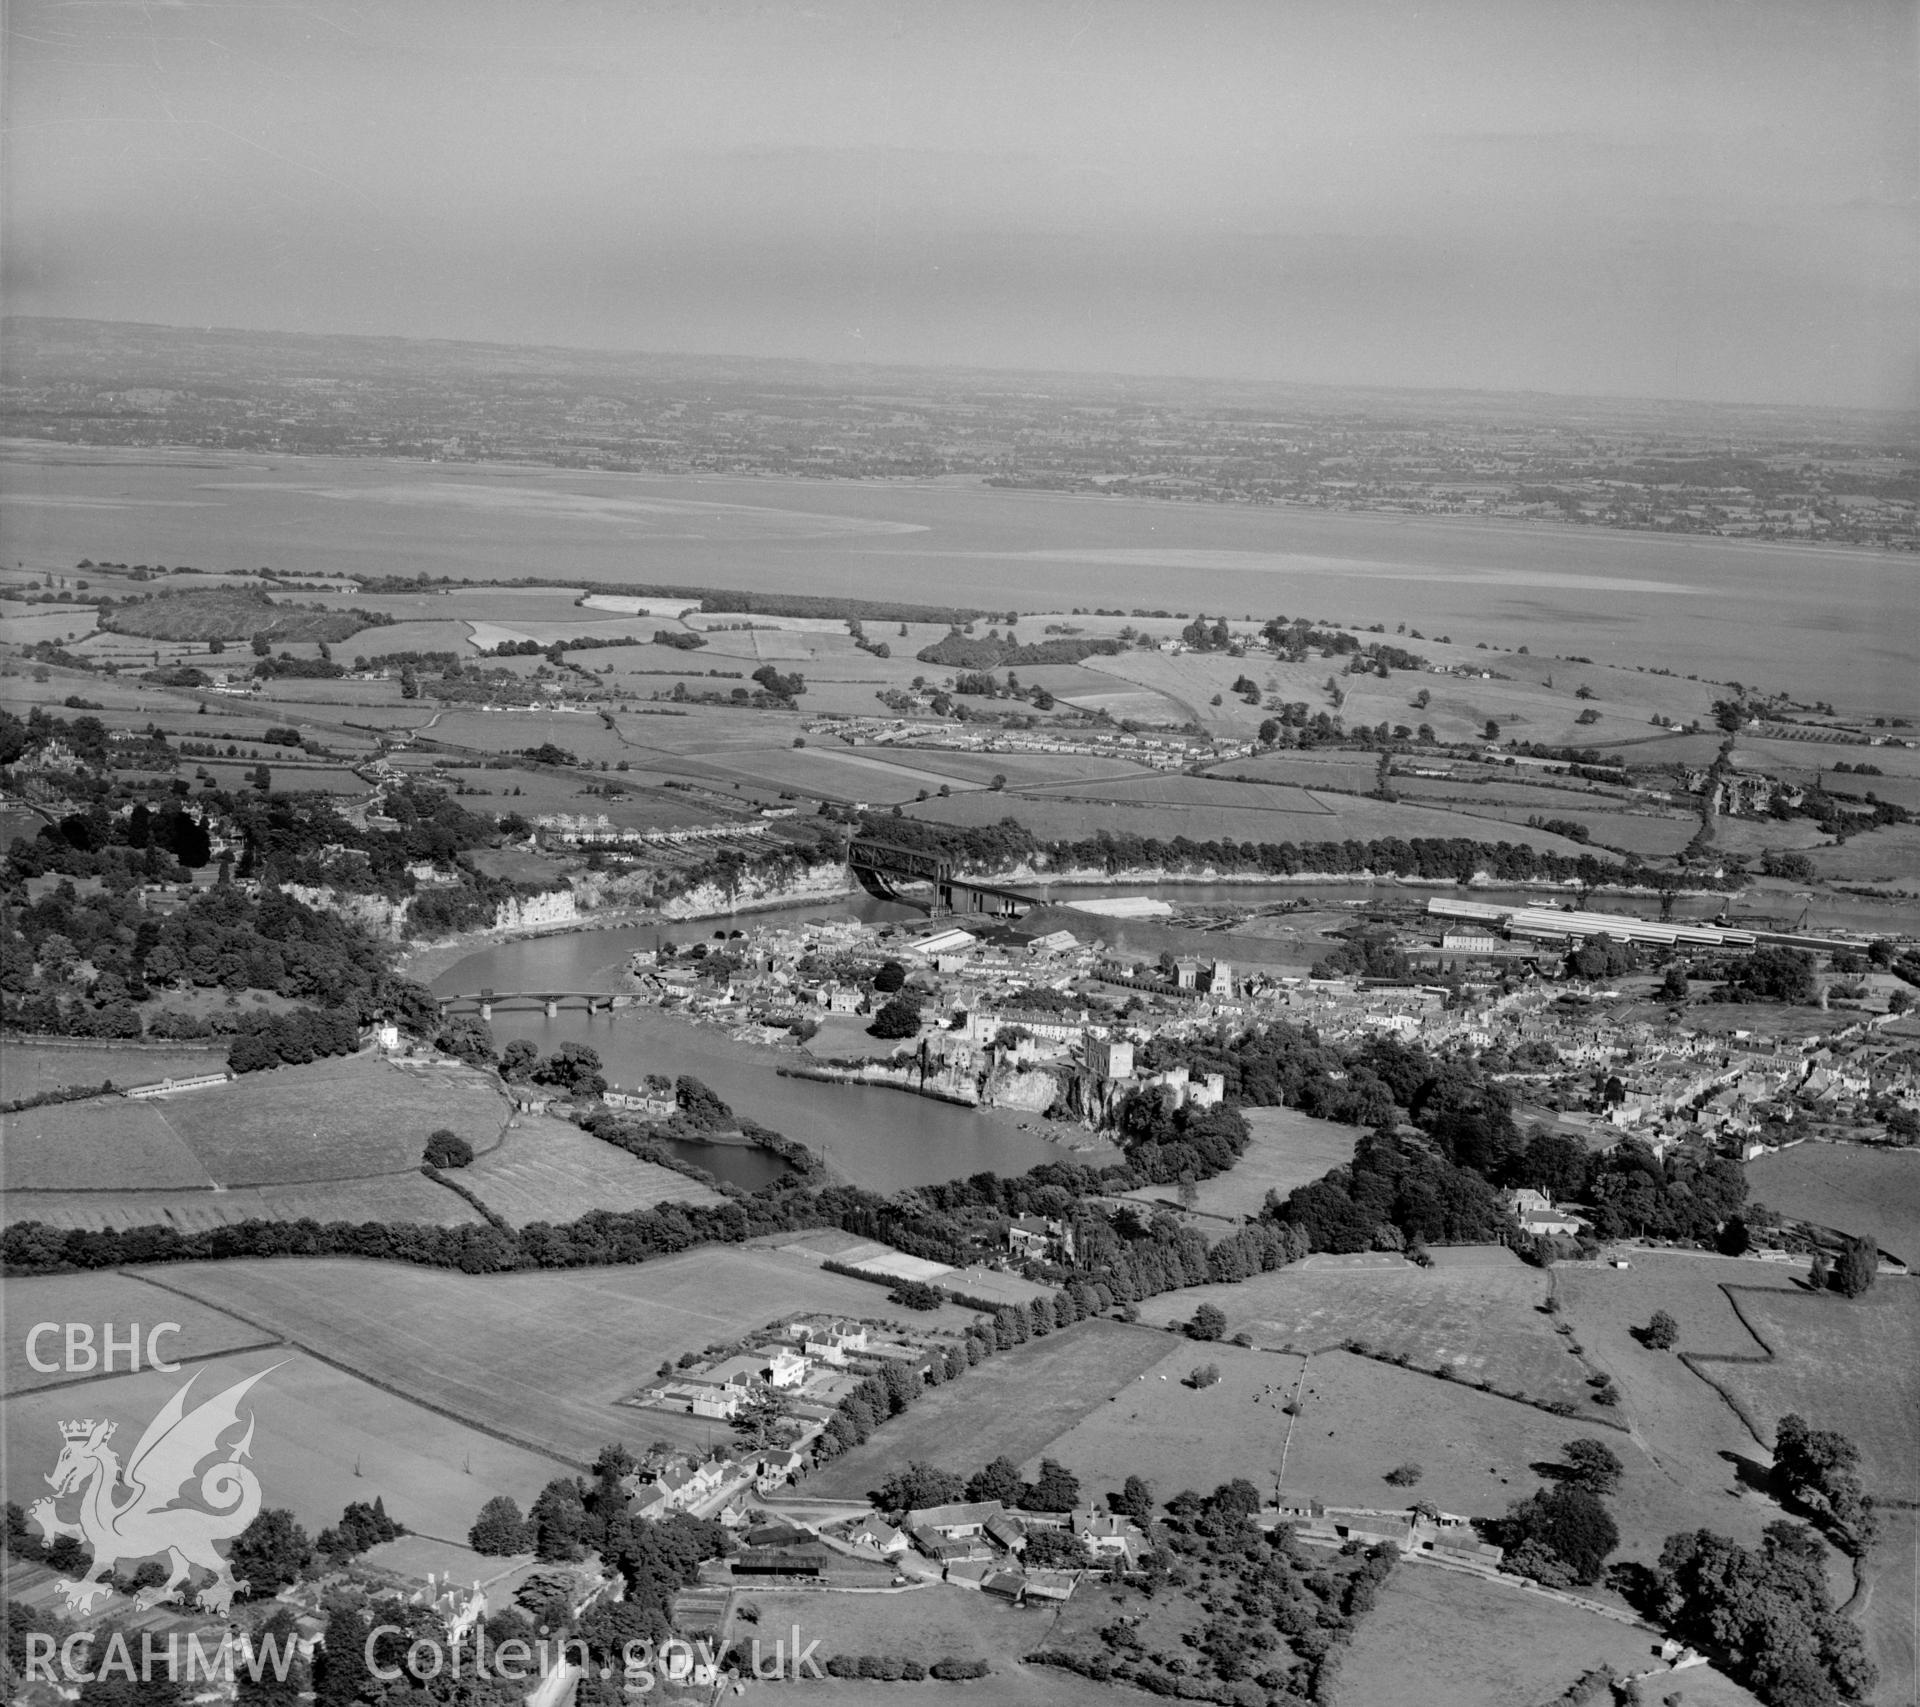 Distant view of Chepstow